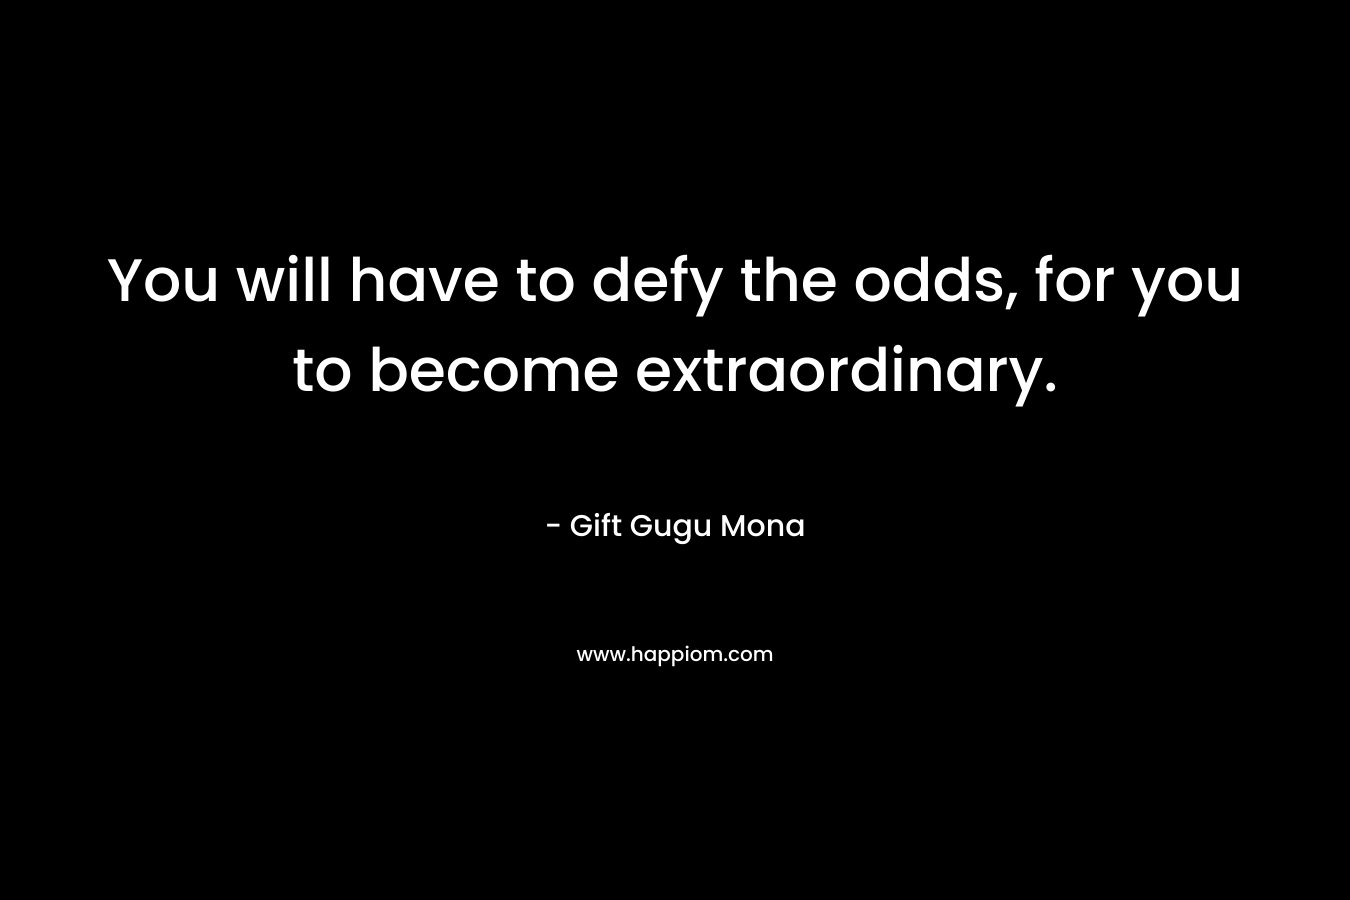 You will have to defy the odds, for you to become extraordinary.